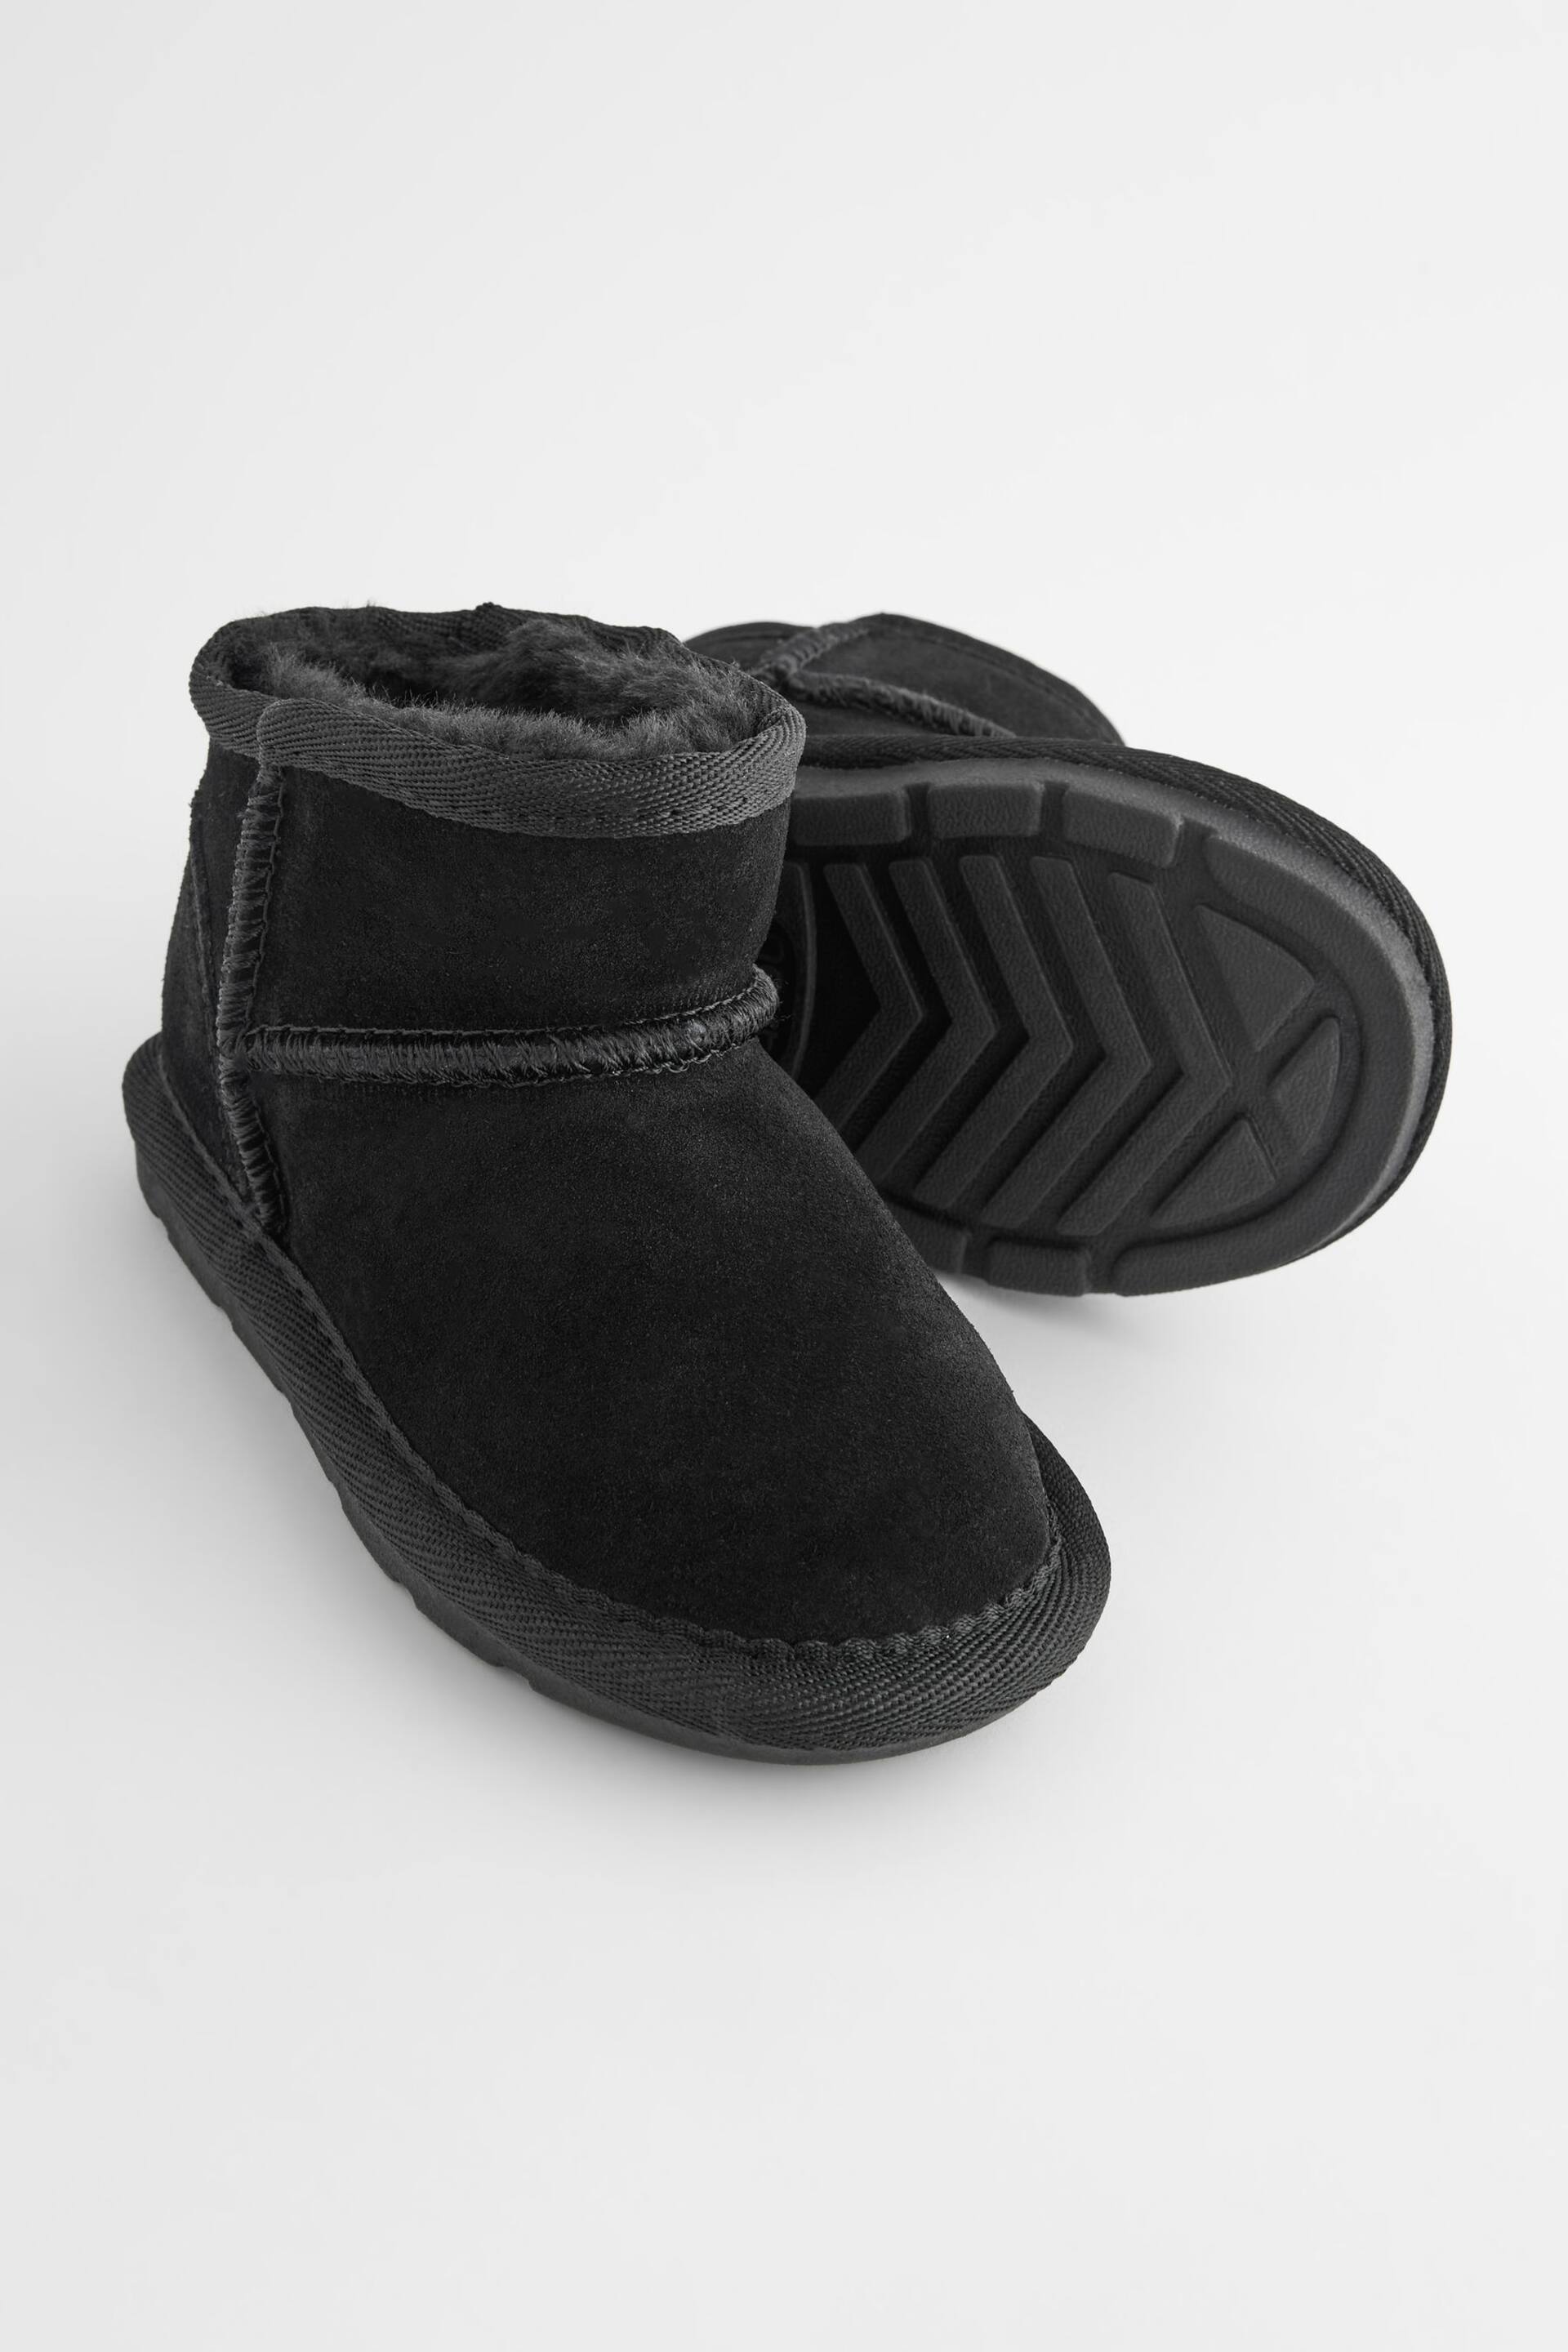 Black Suede Mini Faux Fur Lined Water Repellent Pull-On Suede Boots - Image 7 of 9